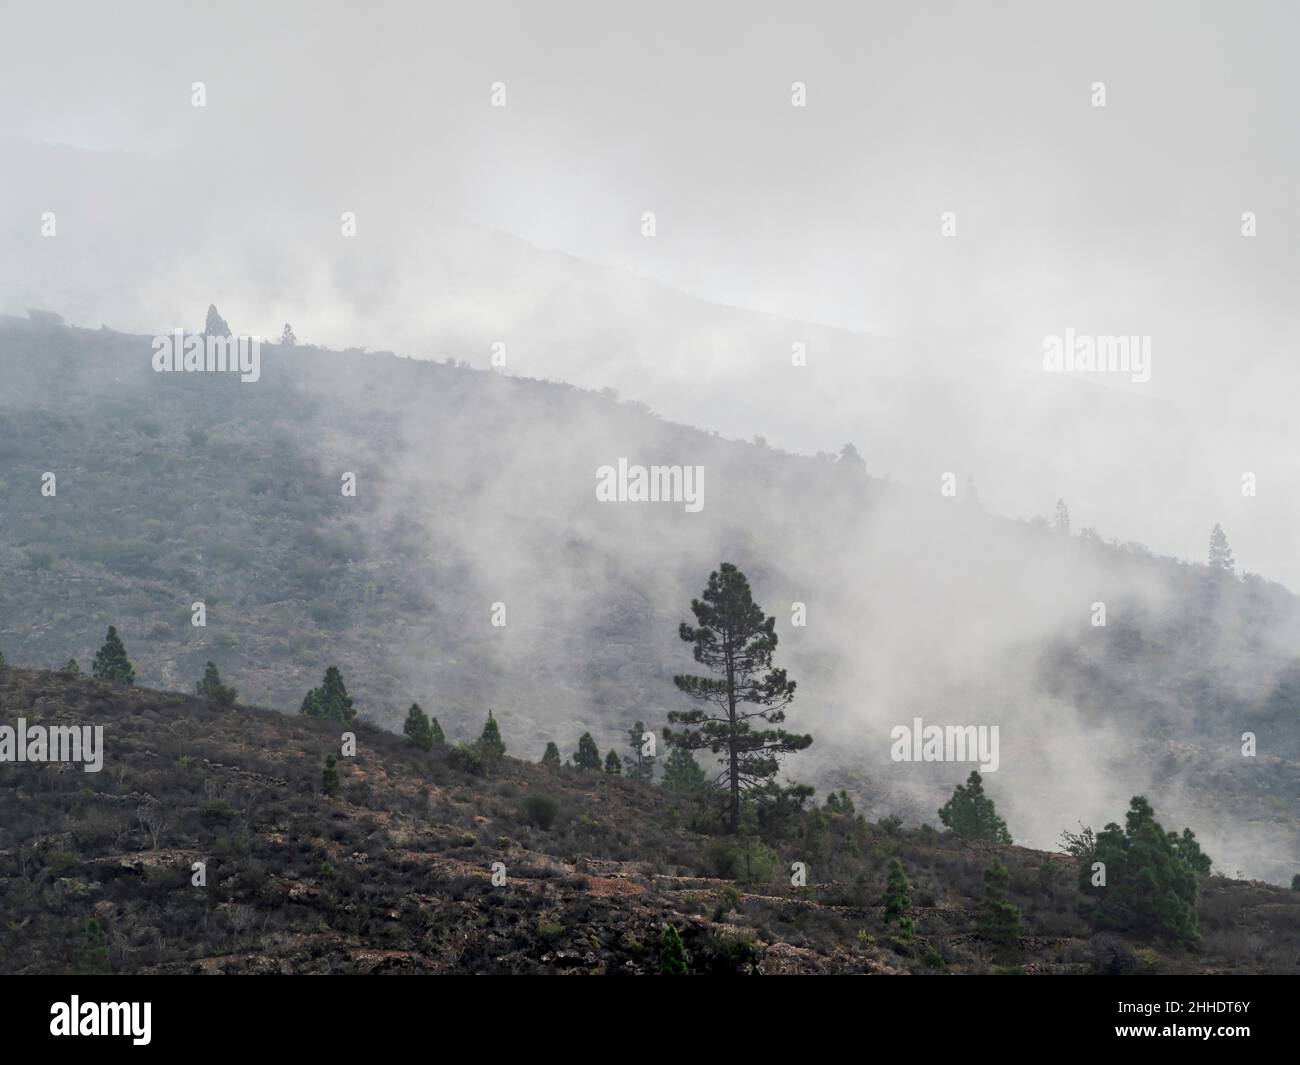 The conservation village of Chirche, Guia de Isora district, Tenerife. Mist clouds in the corona forestal. Stock Photo